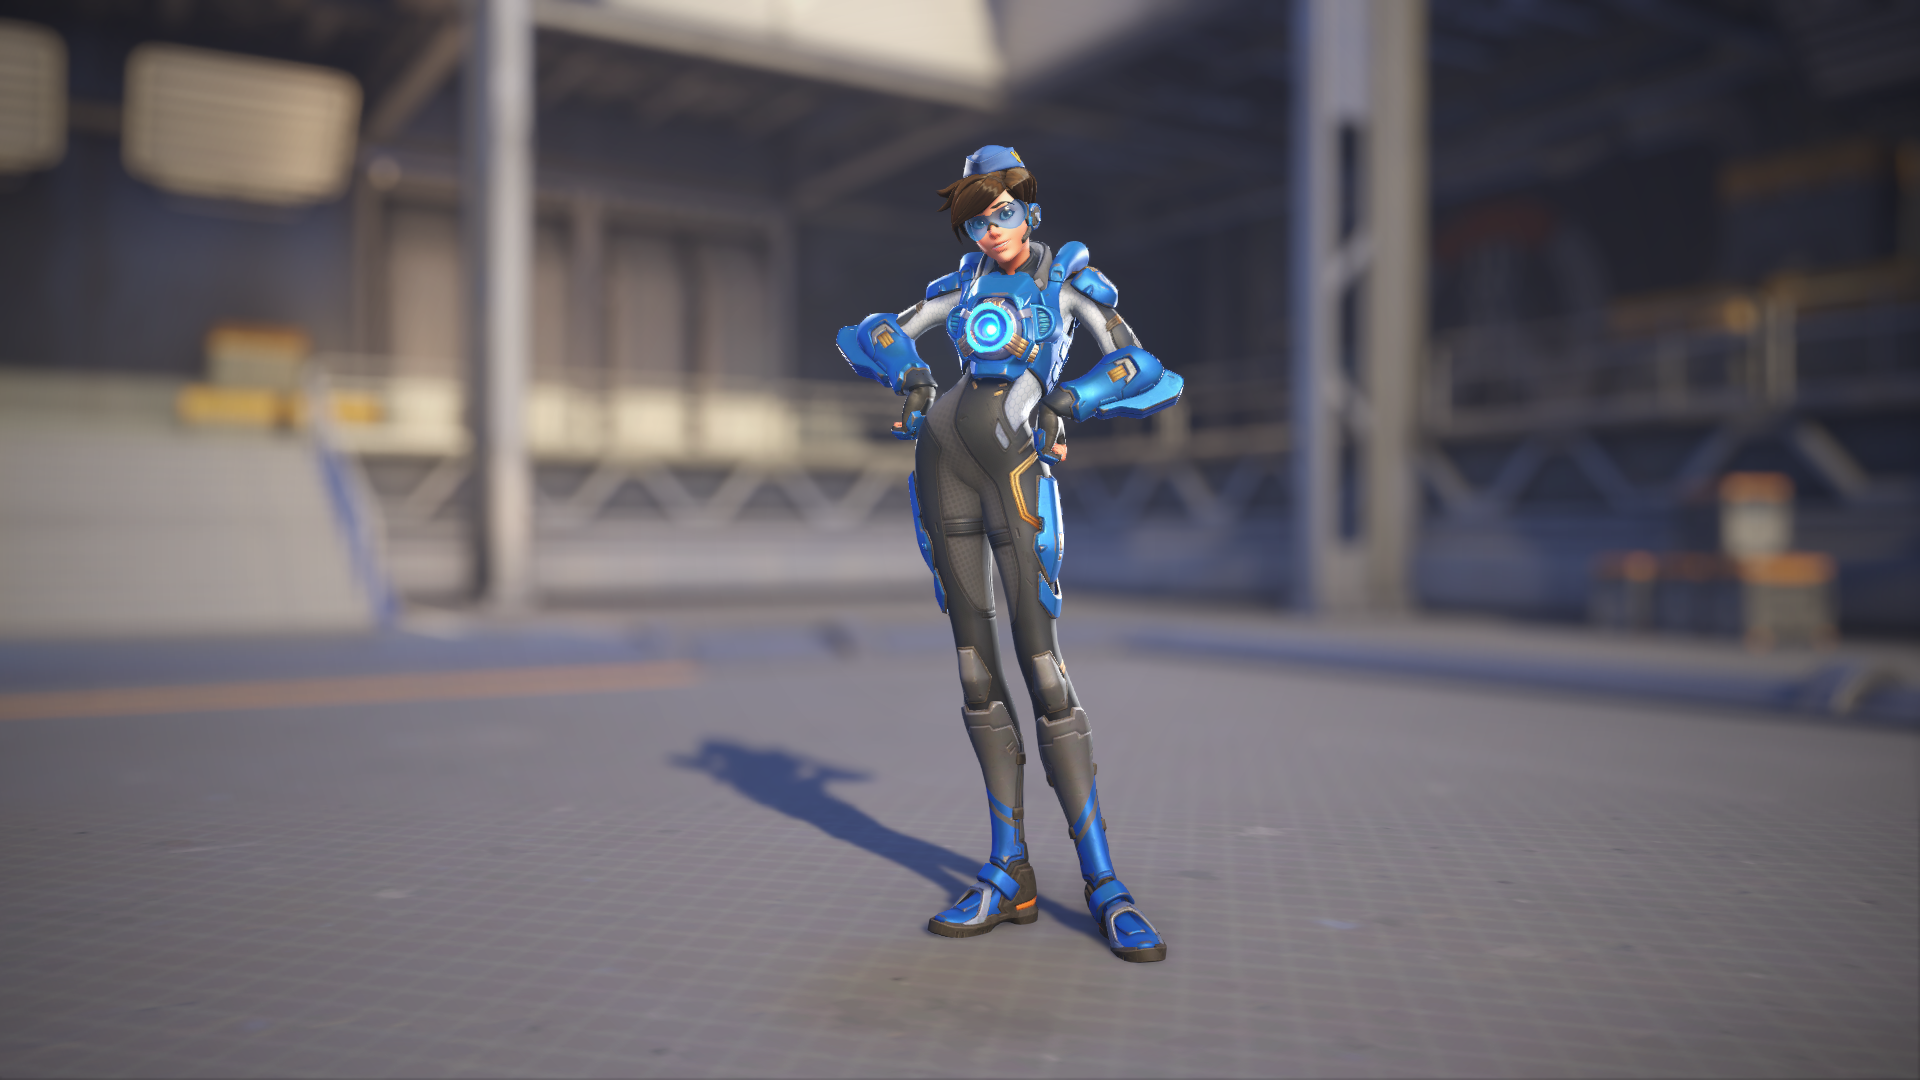 Tracer models her Cadet Oxton skin in Overwatch 2.